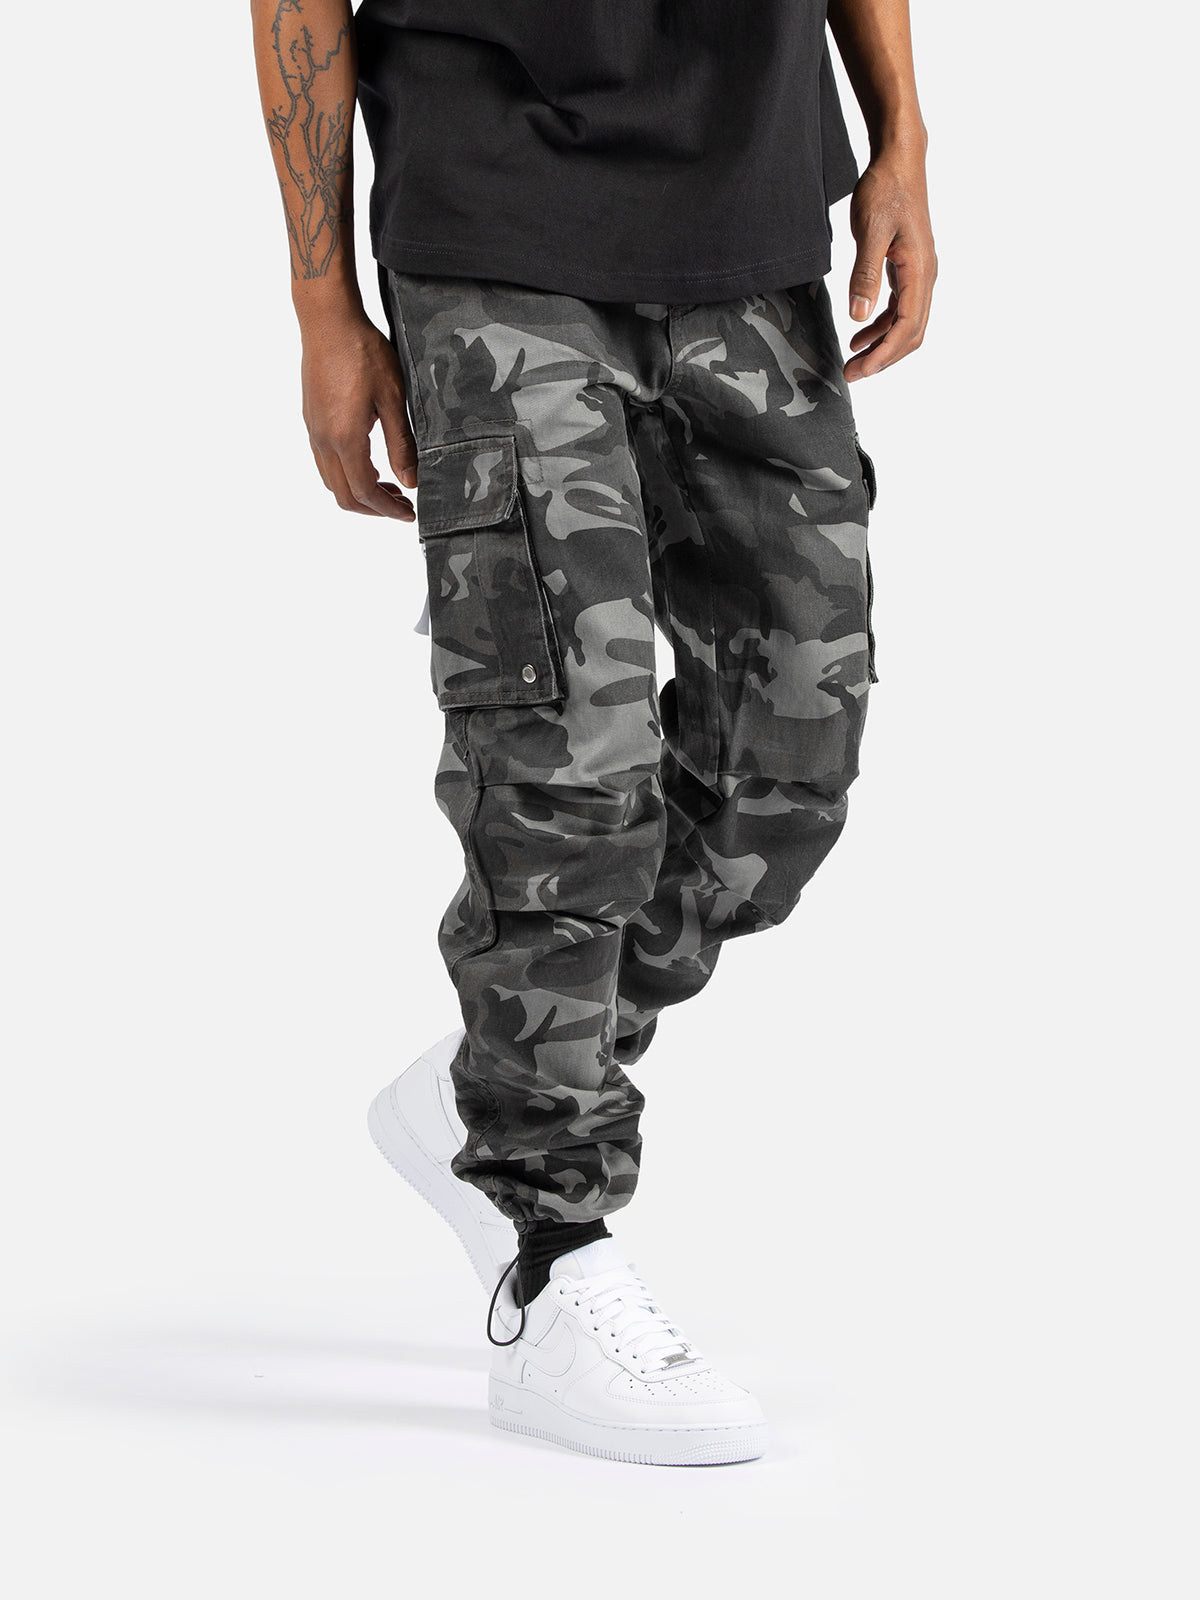 Olive Green Camouflage Jogger Sweatpants - Made in USA